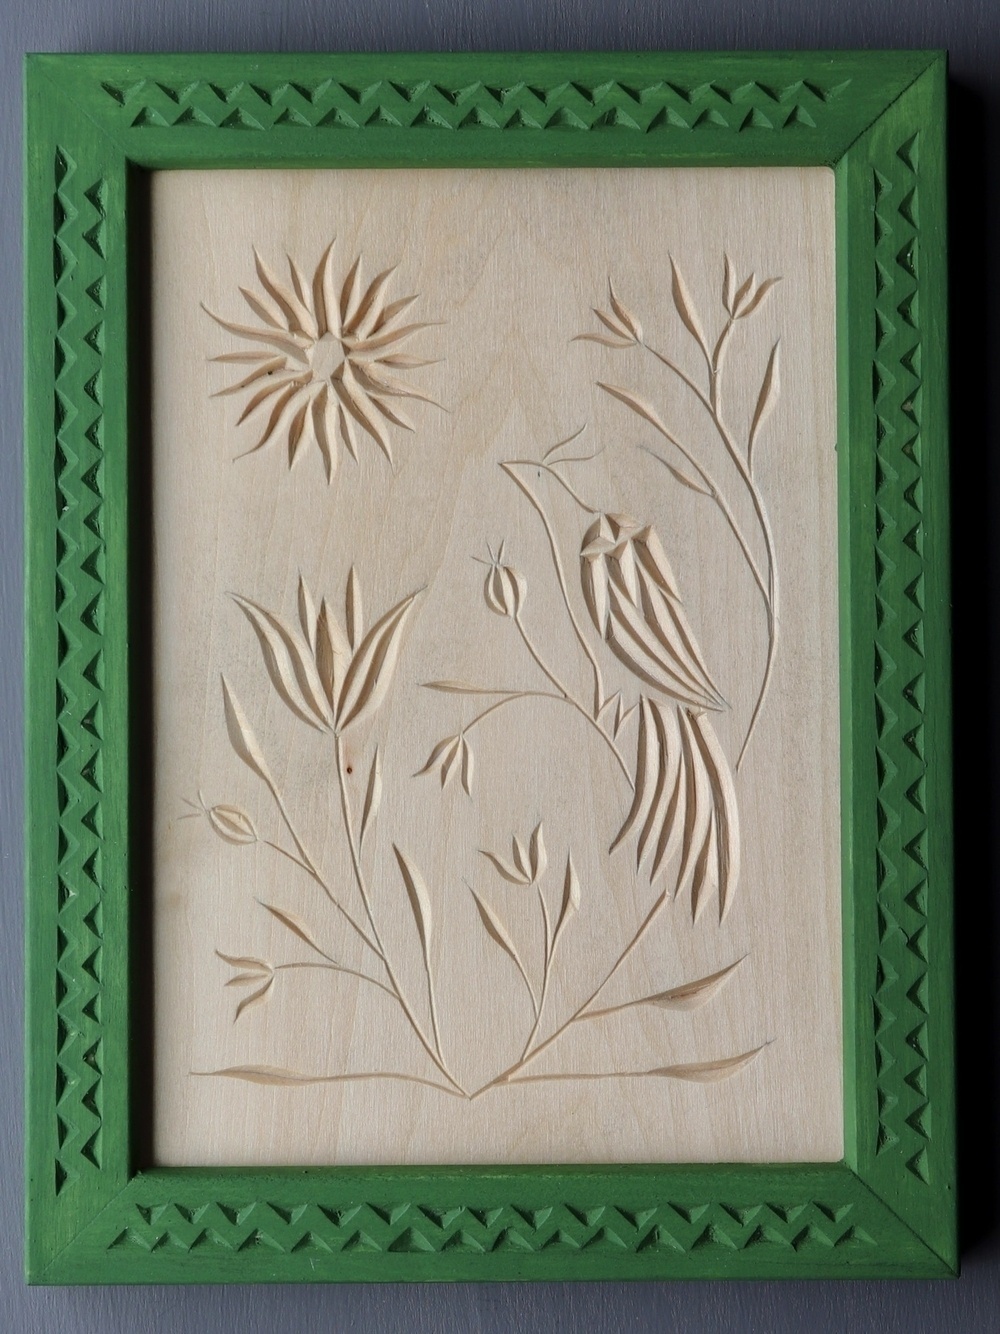 relief carving of a bird perched among flowers gazing at the sun; green frame carved with weaving triangles